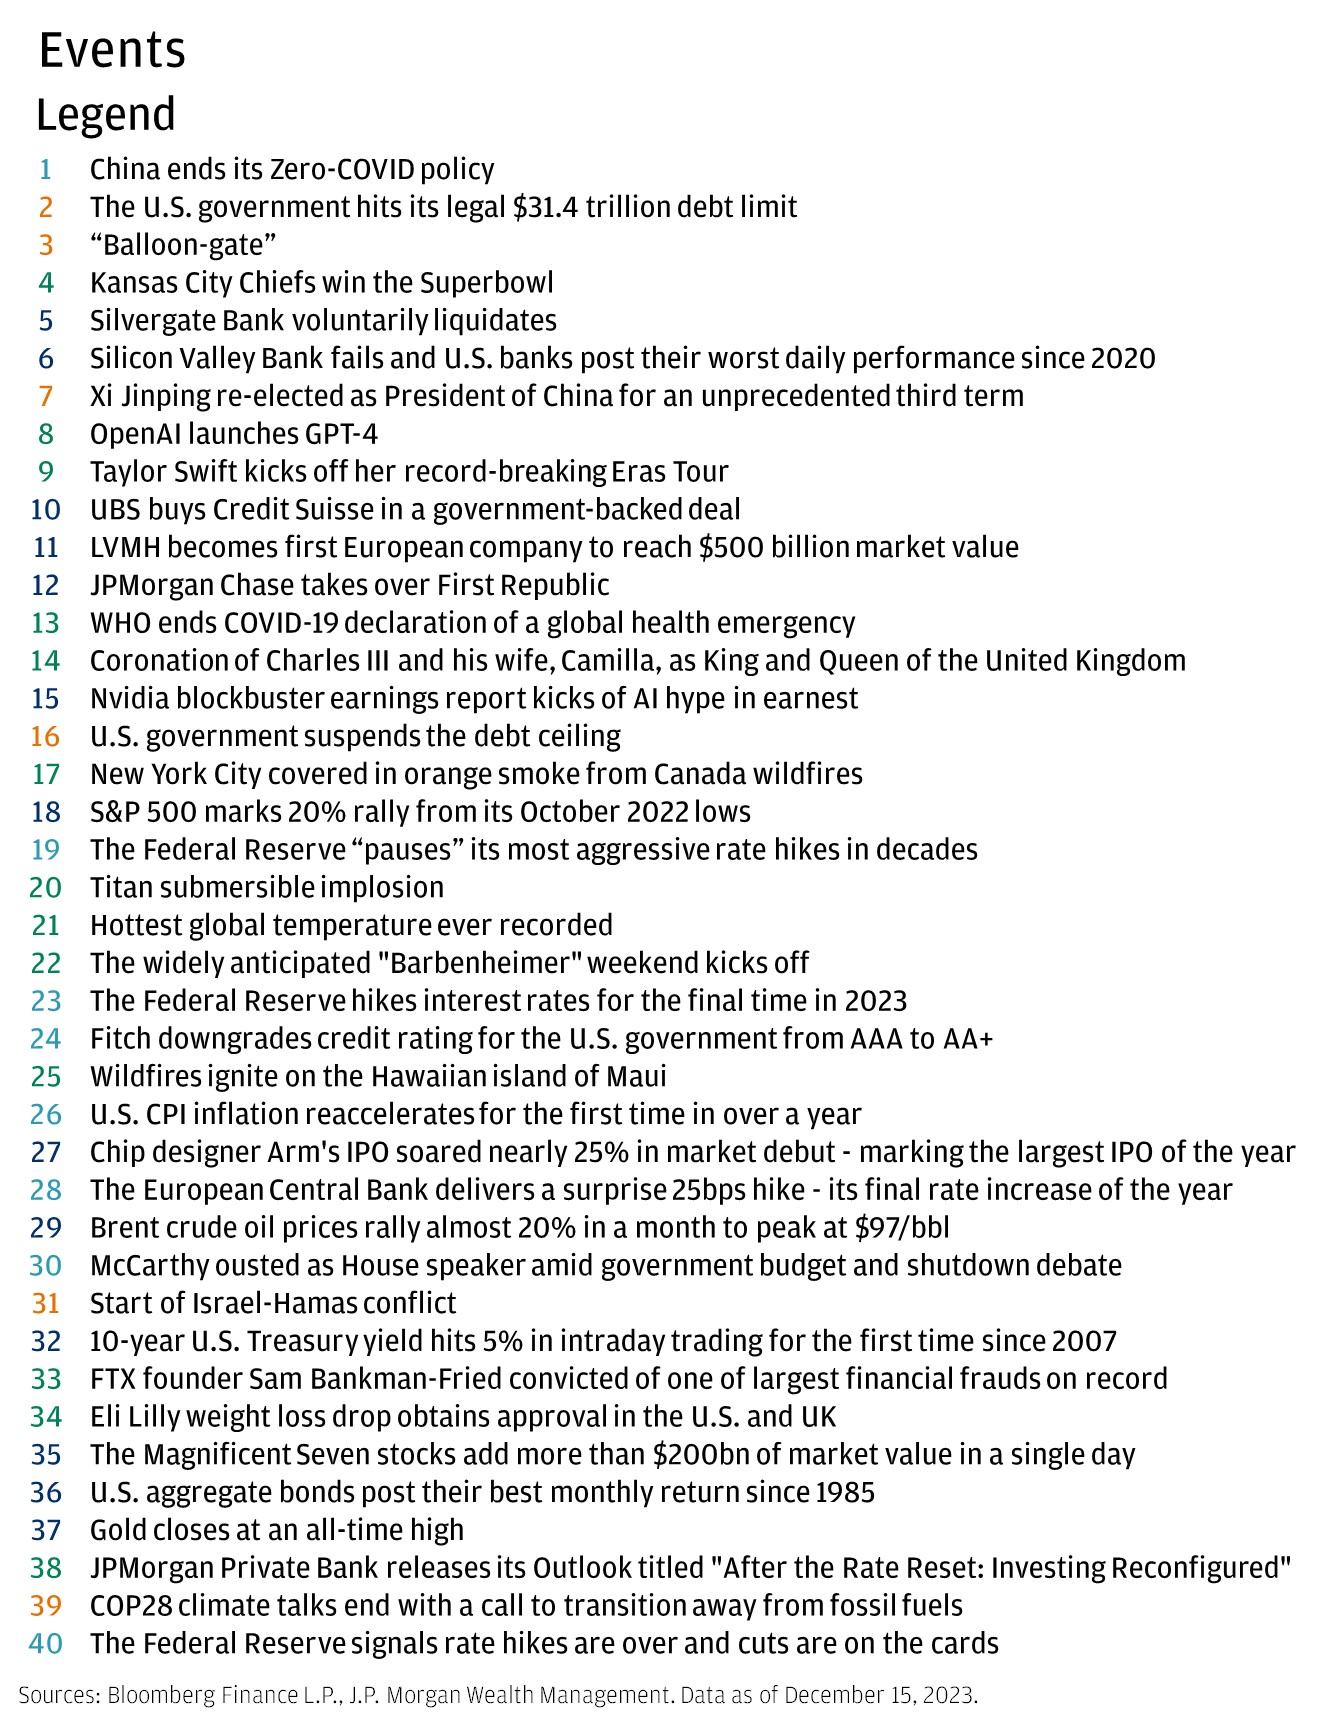 This table shows the 40 events that occurred between January 2023 and December 2023.